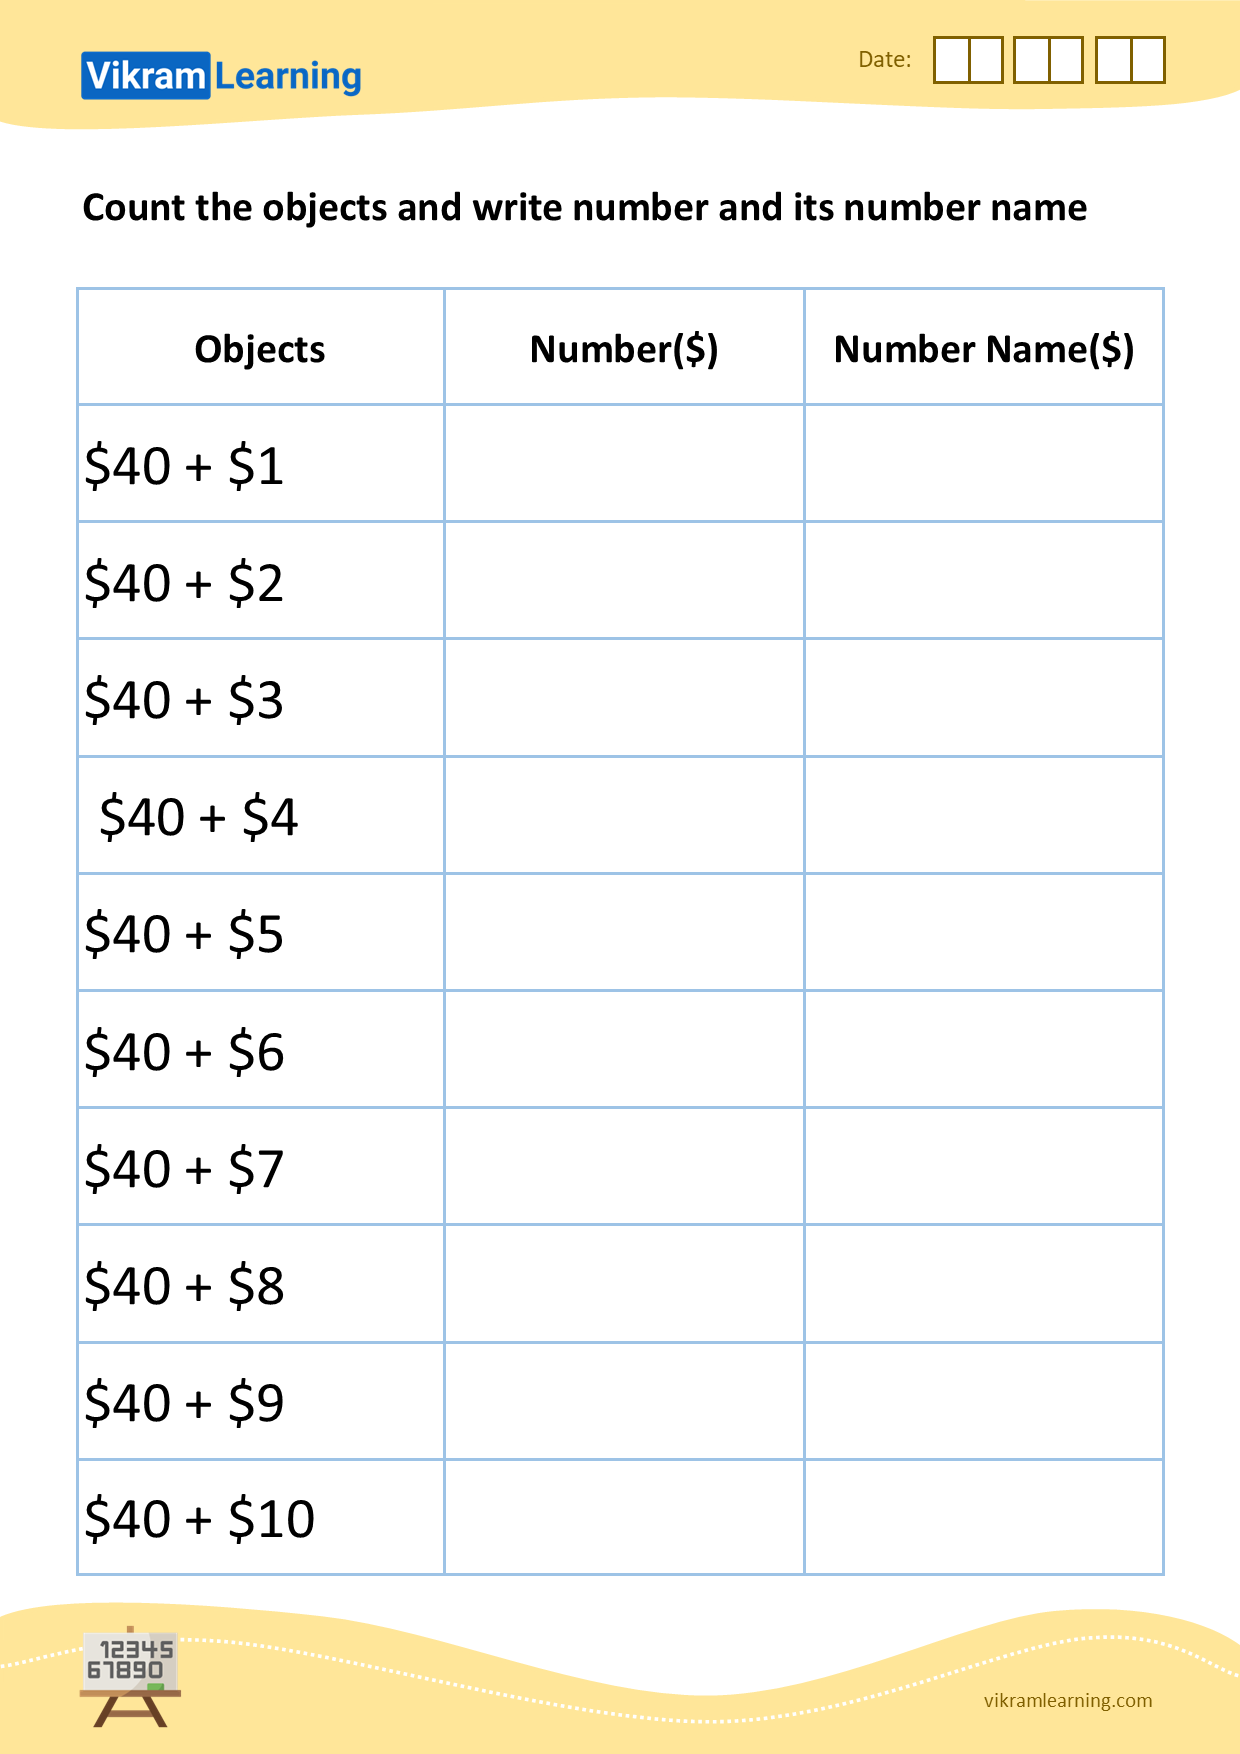 Download count the objects and write number and its number name - 3 worksheets